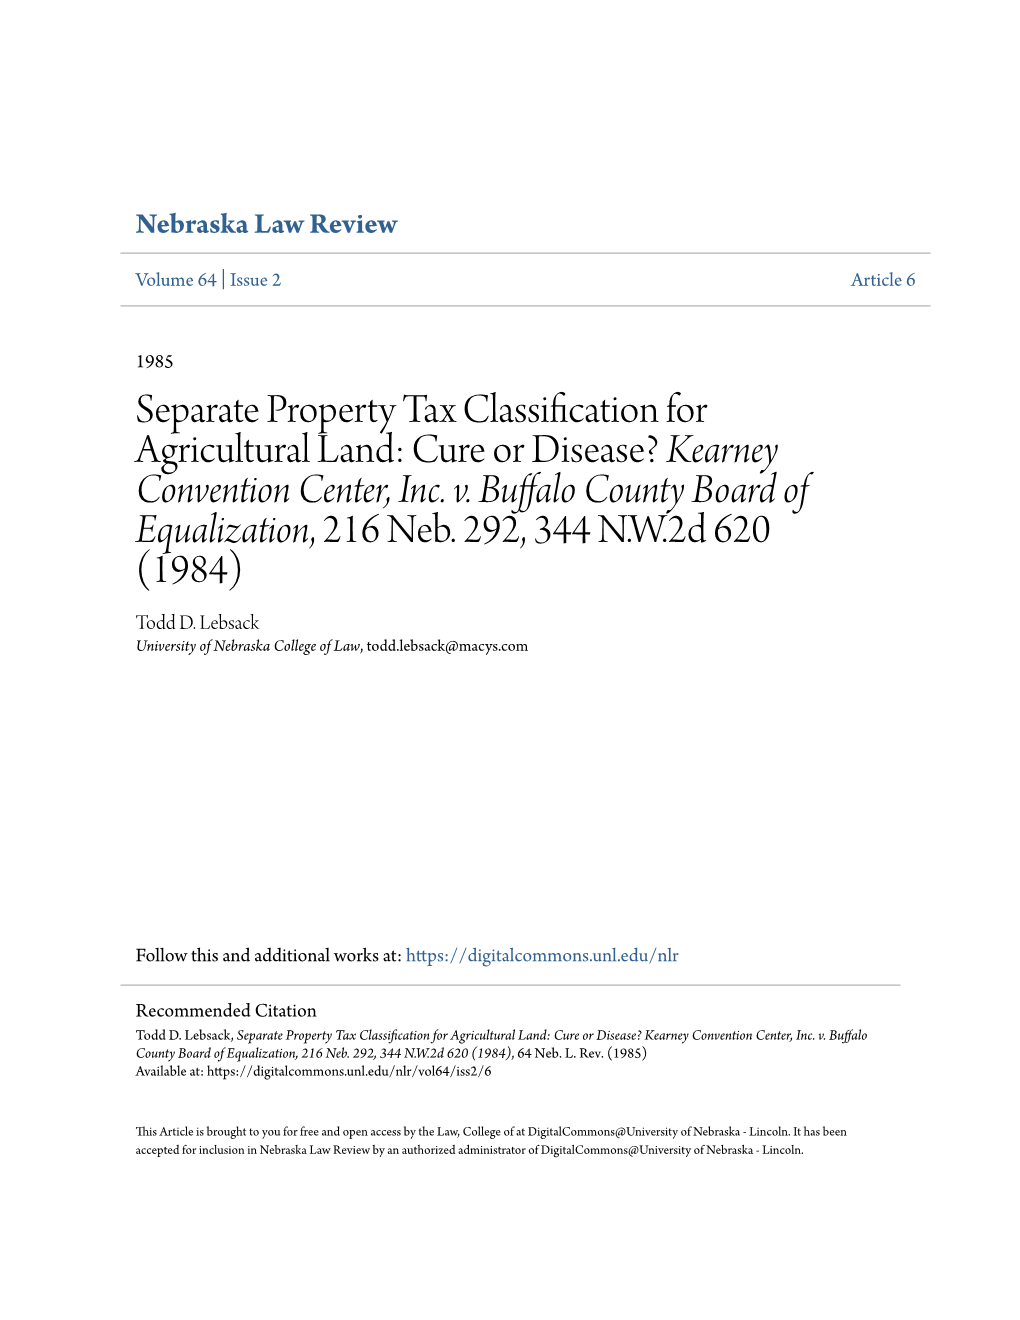 Separate Property Tax Classification for Agricultural Land: Cure Or Disease? Kearney Convention Center, Inc. V. Buffalo County Board of Equalization, 216 Neb